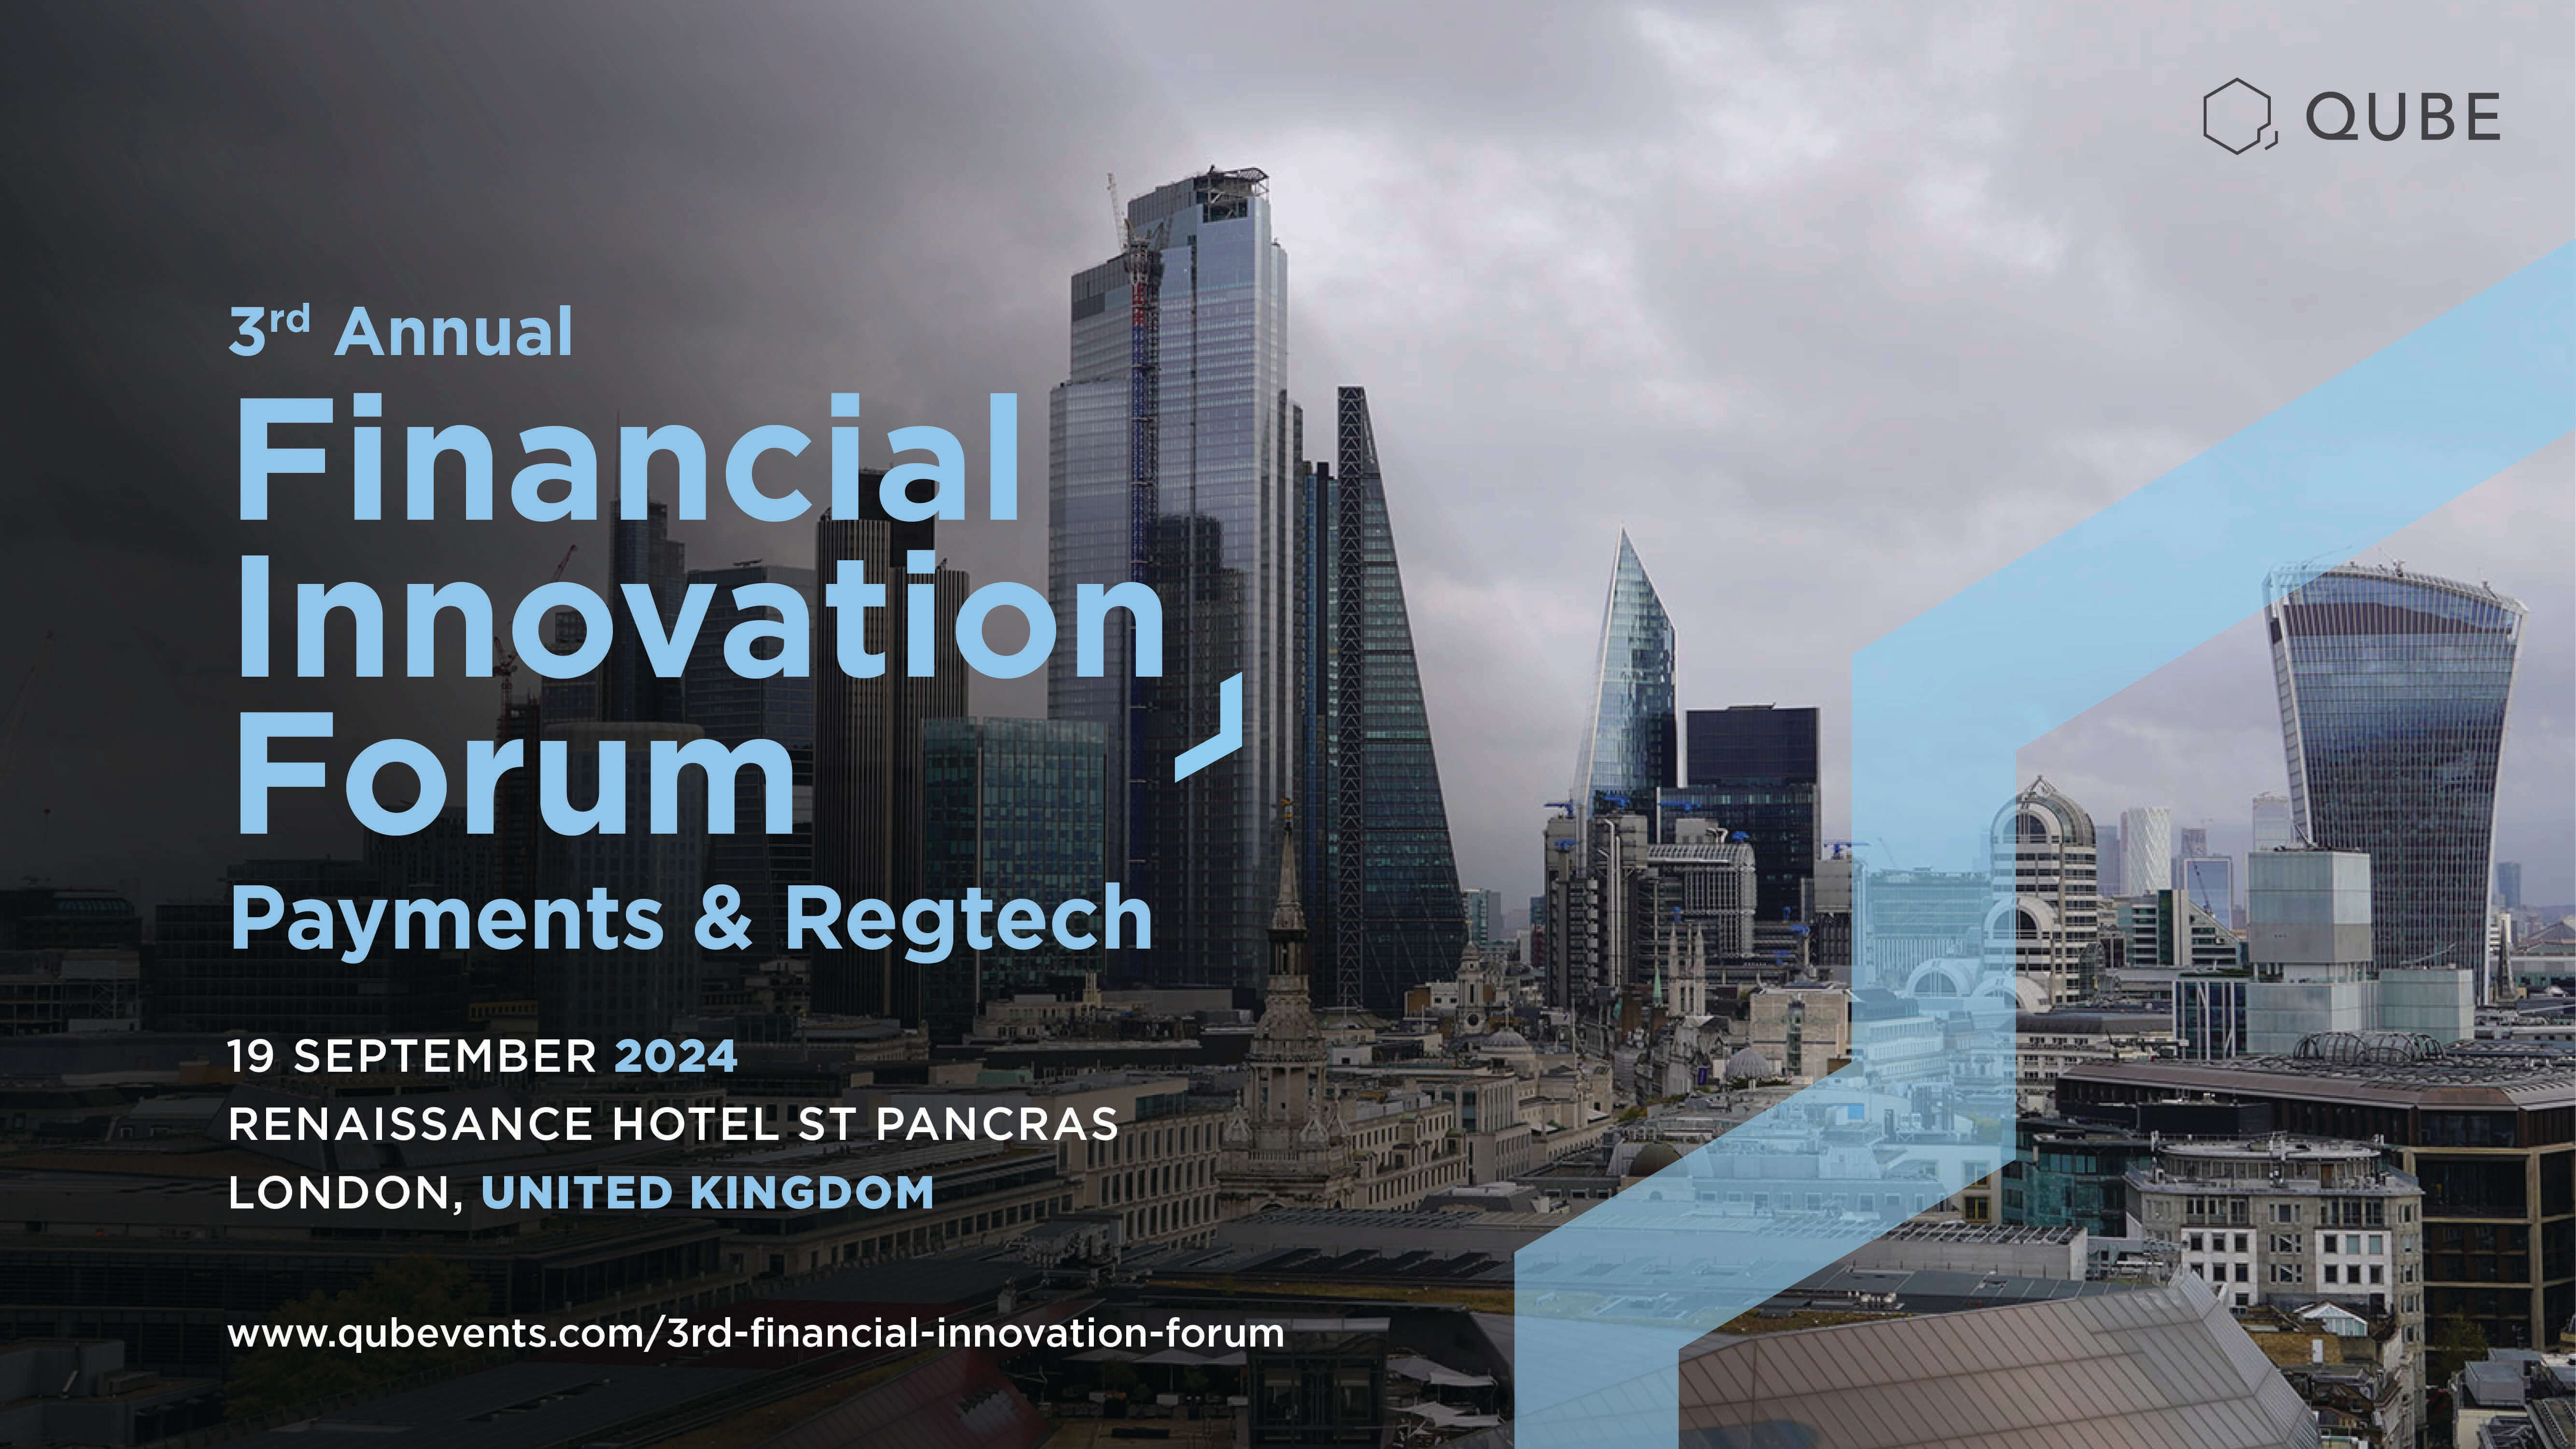 The 3rd Financial Innovation Forum - Payments & Regtech organized by melina thomas